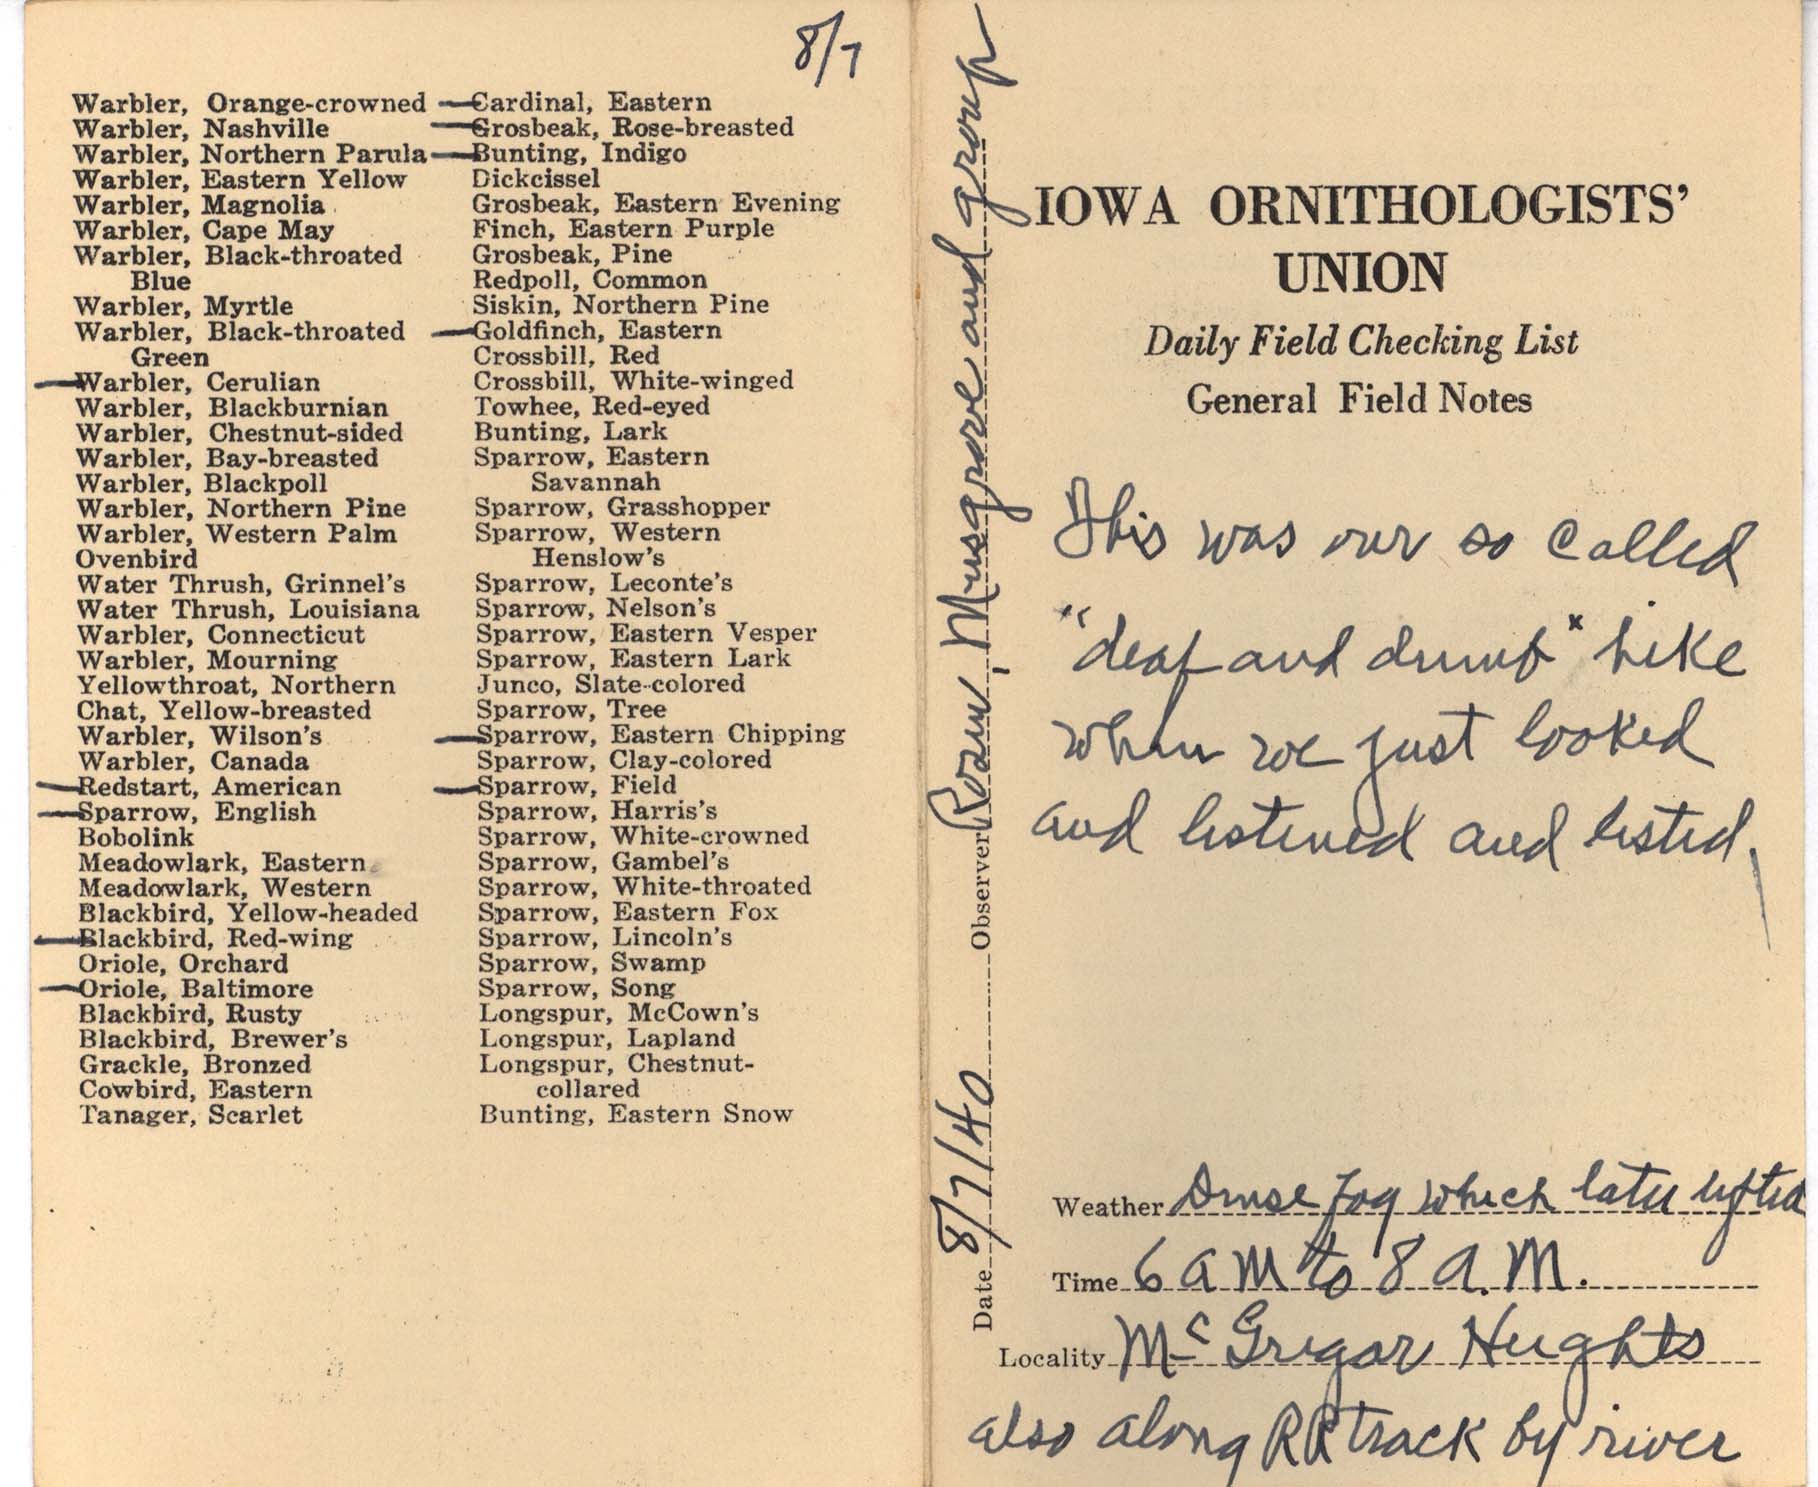 Daily field checking list by Walter Rosene, August 7, 1940